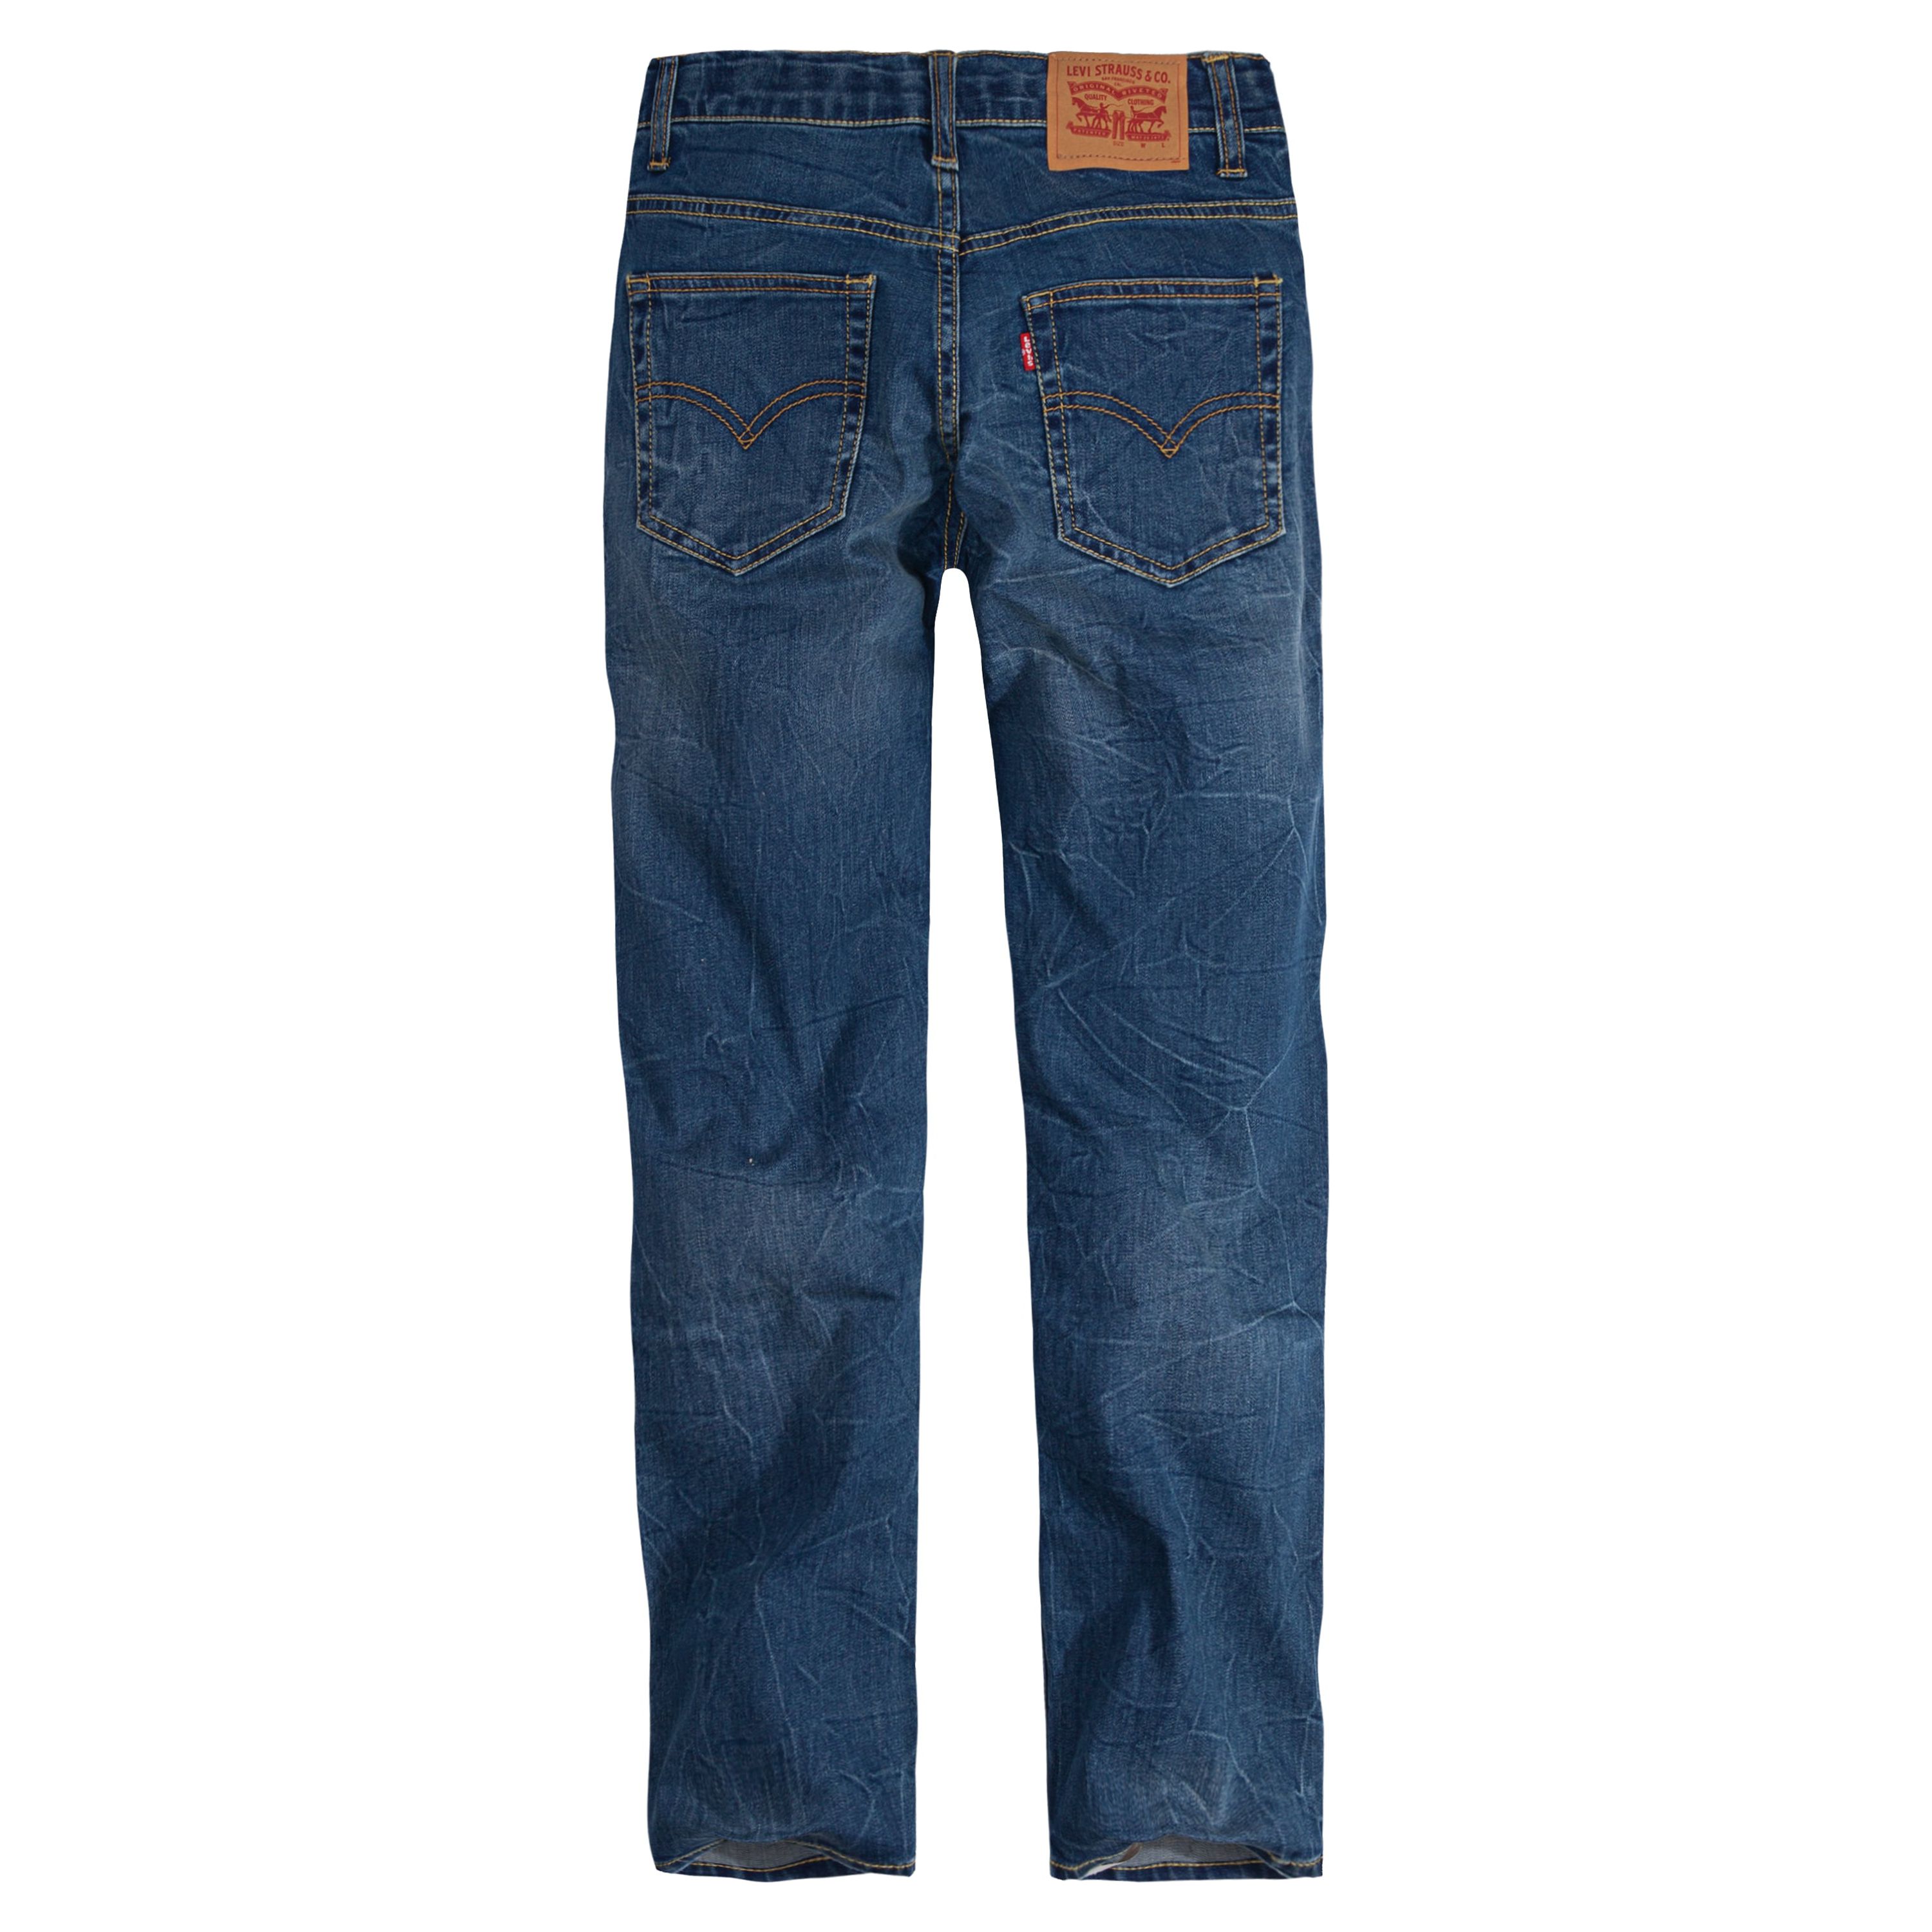 Levi's Boys' Regular Taper Fit Jeans, Sizes 4-20 - image 4 of 13